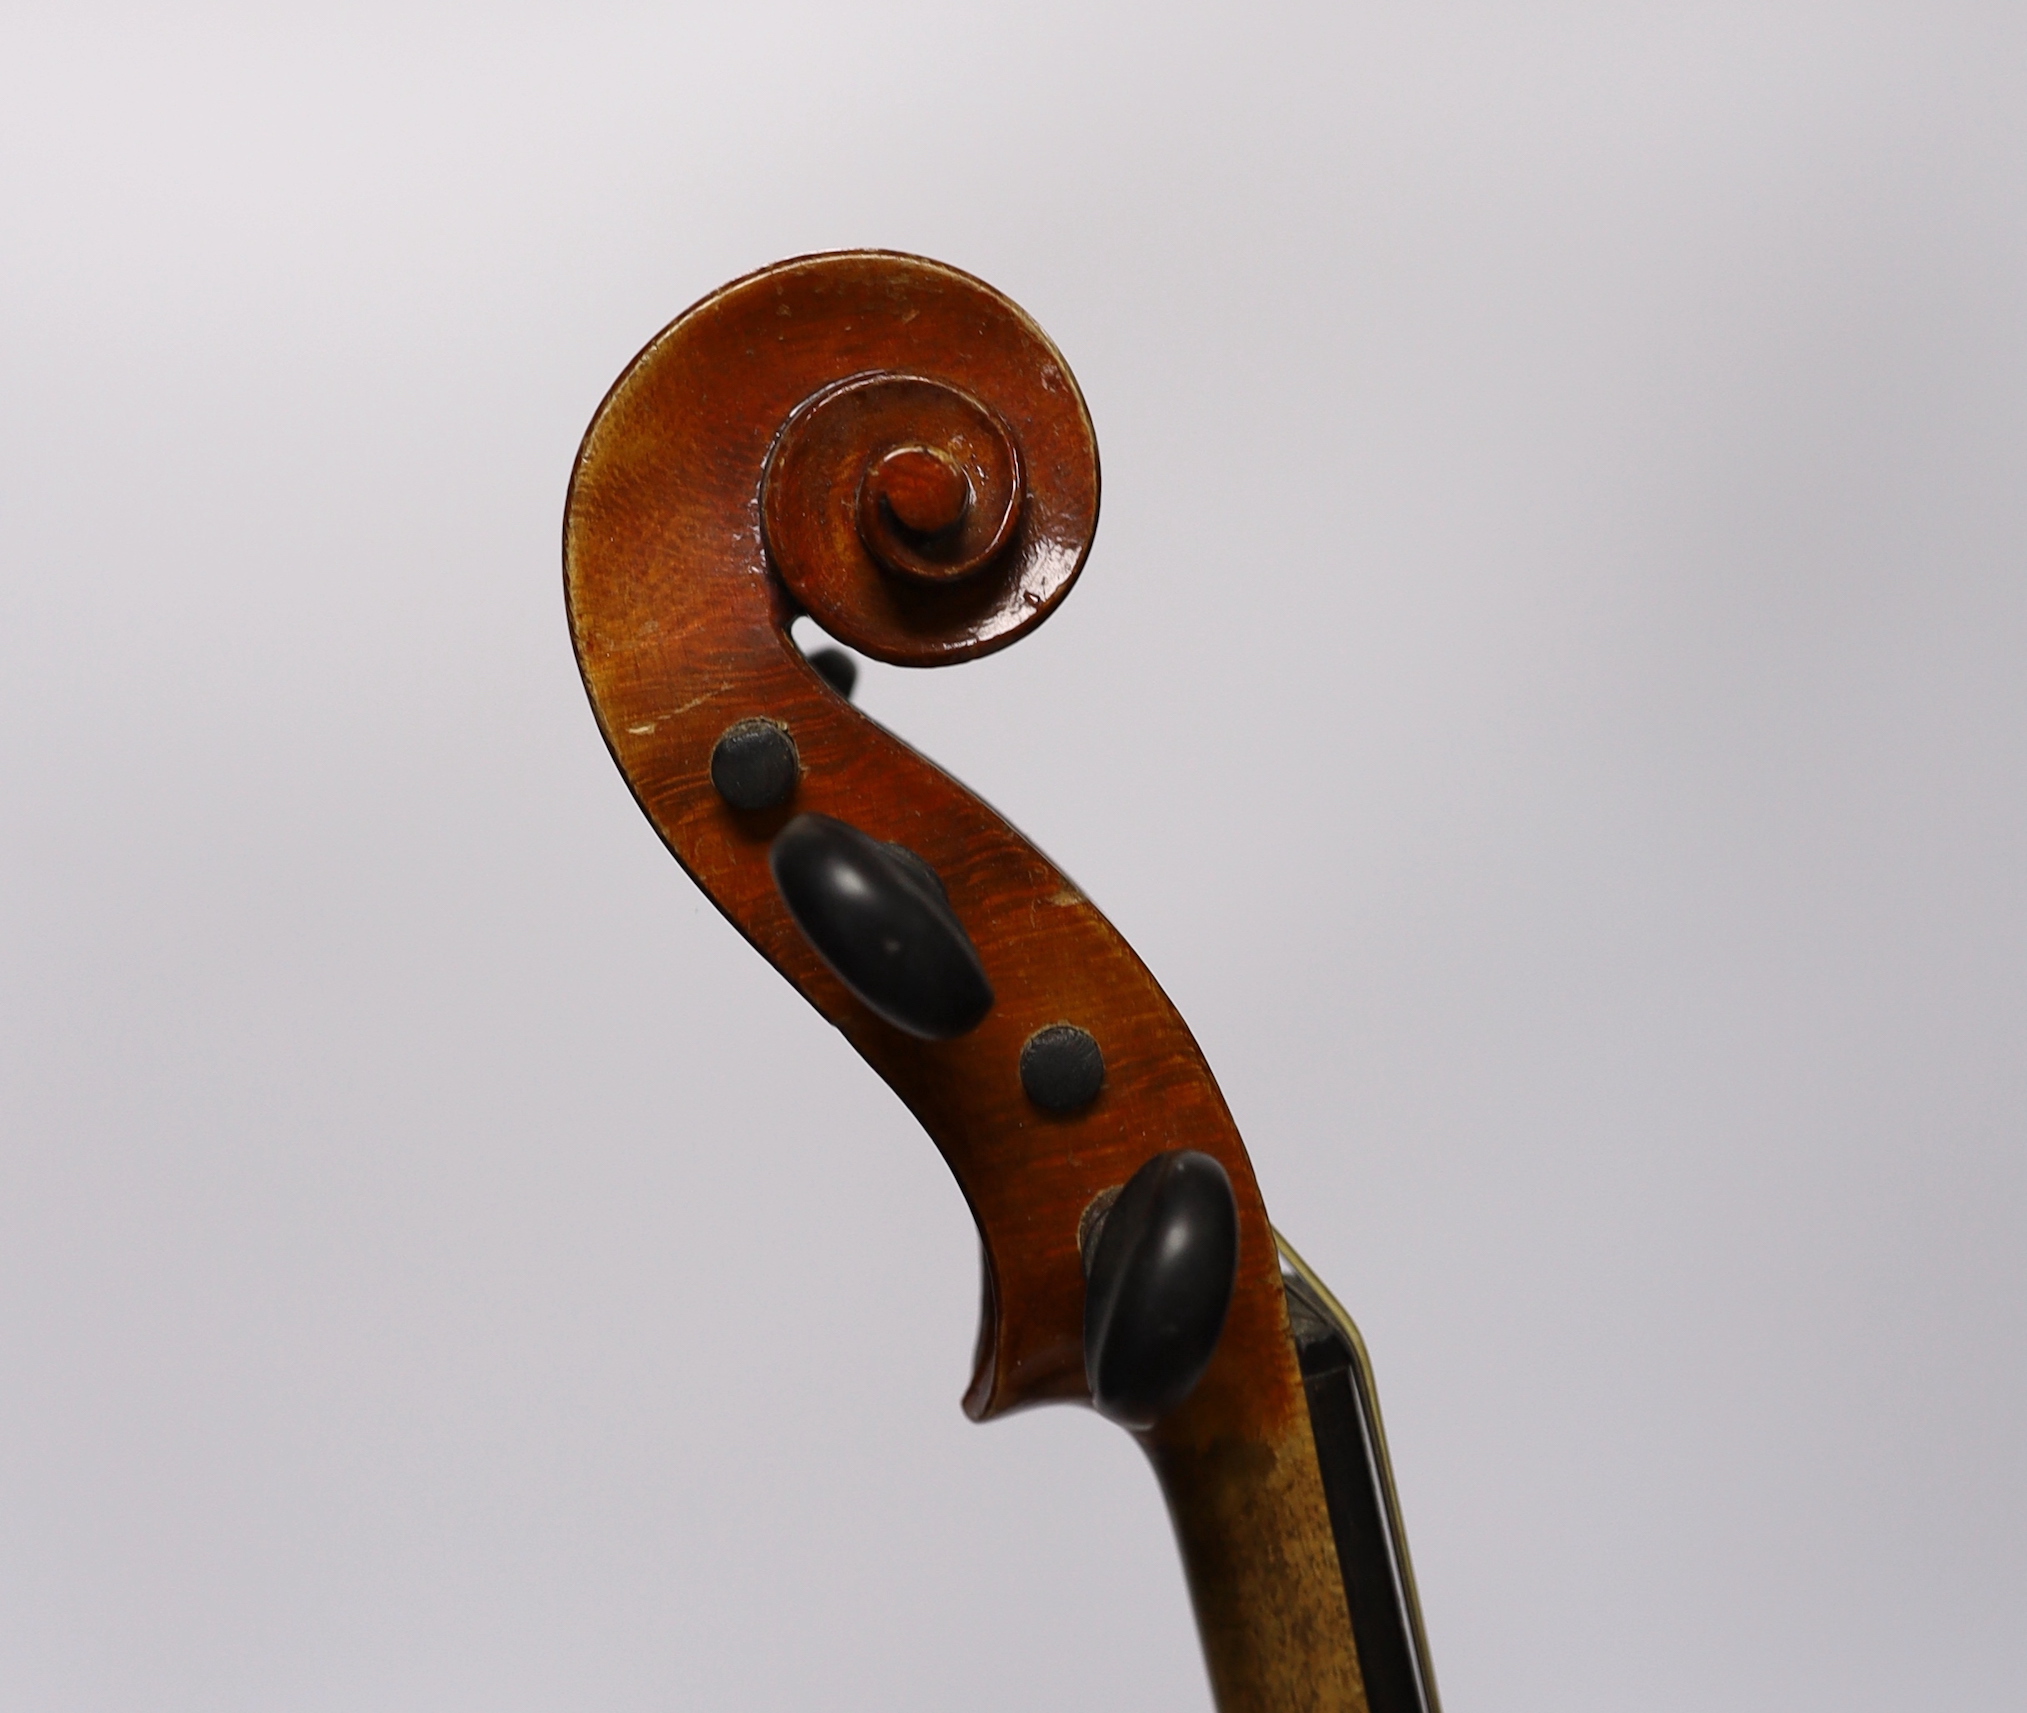 A cased 3/4 sized student violin marked Dresden, with reproduction Stradivarius label